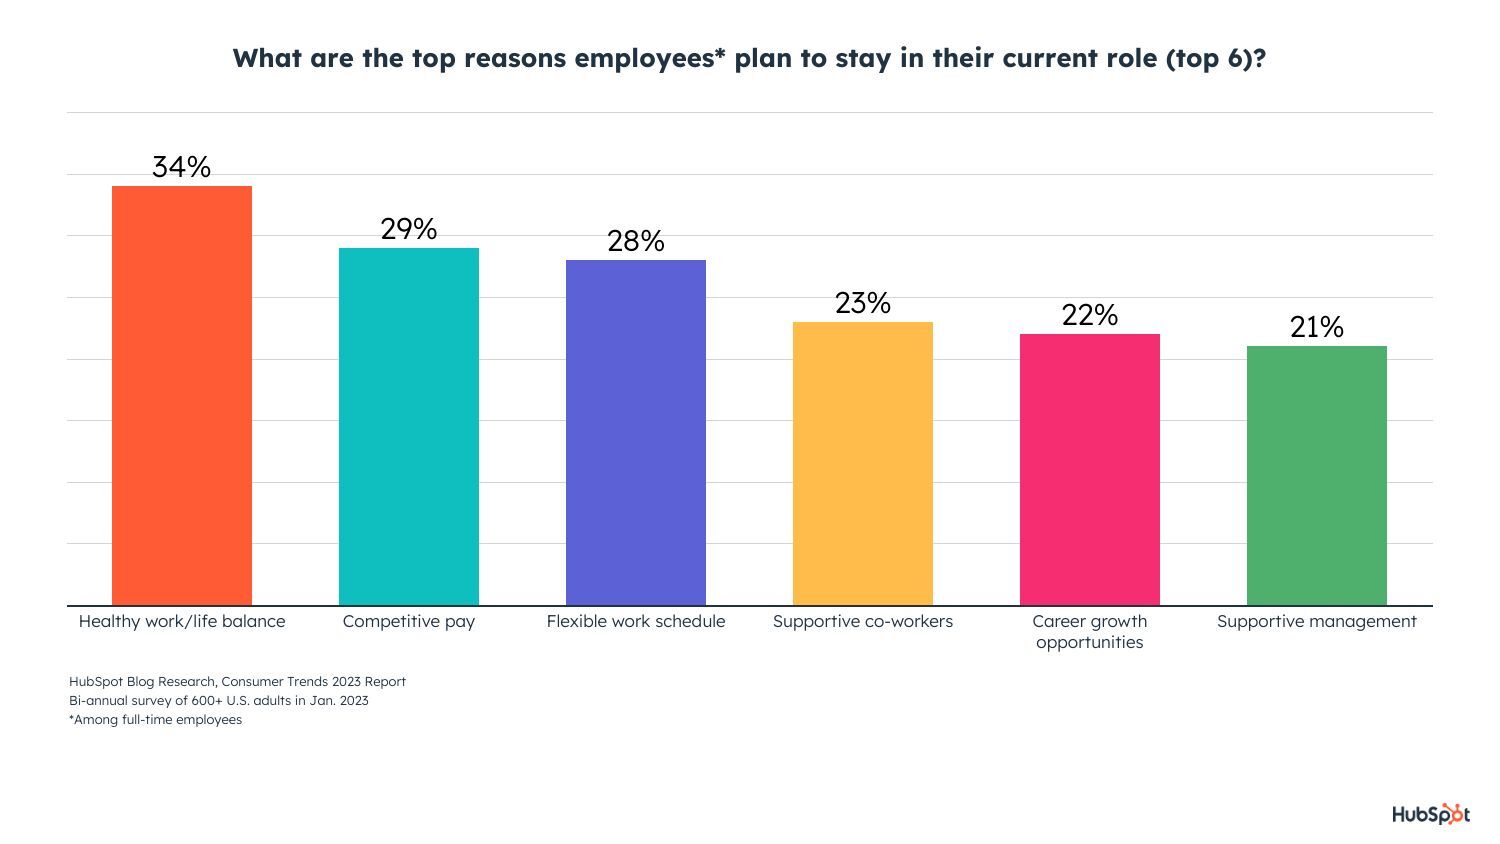 top reasons employees want to stay in their current roles